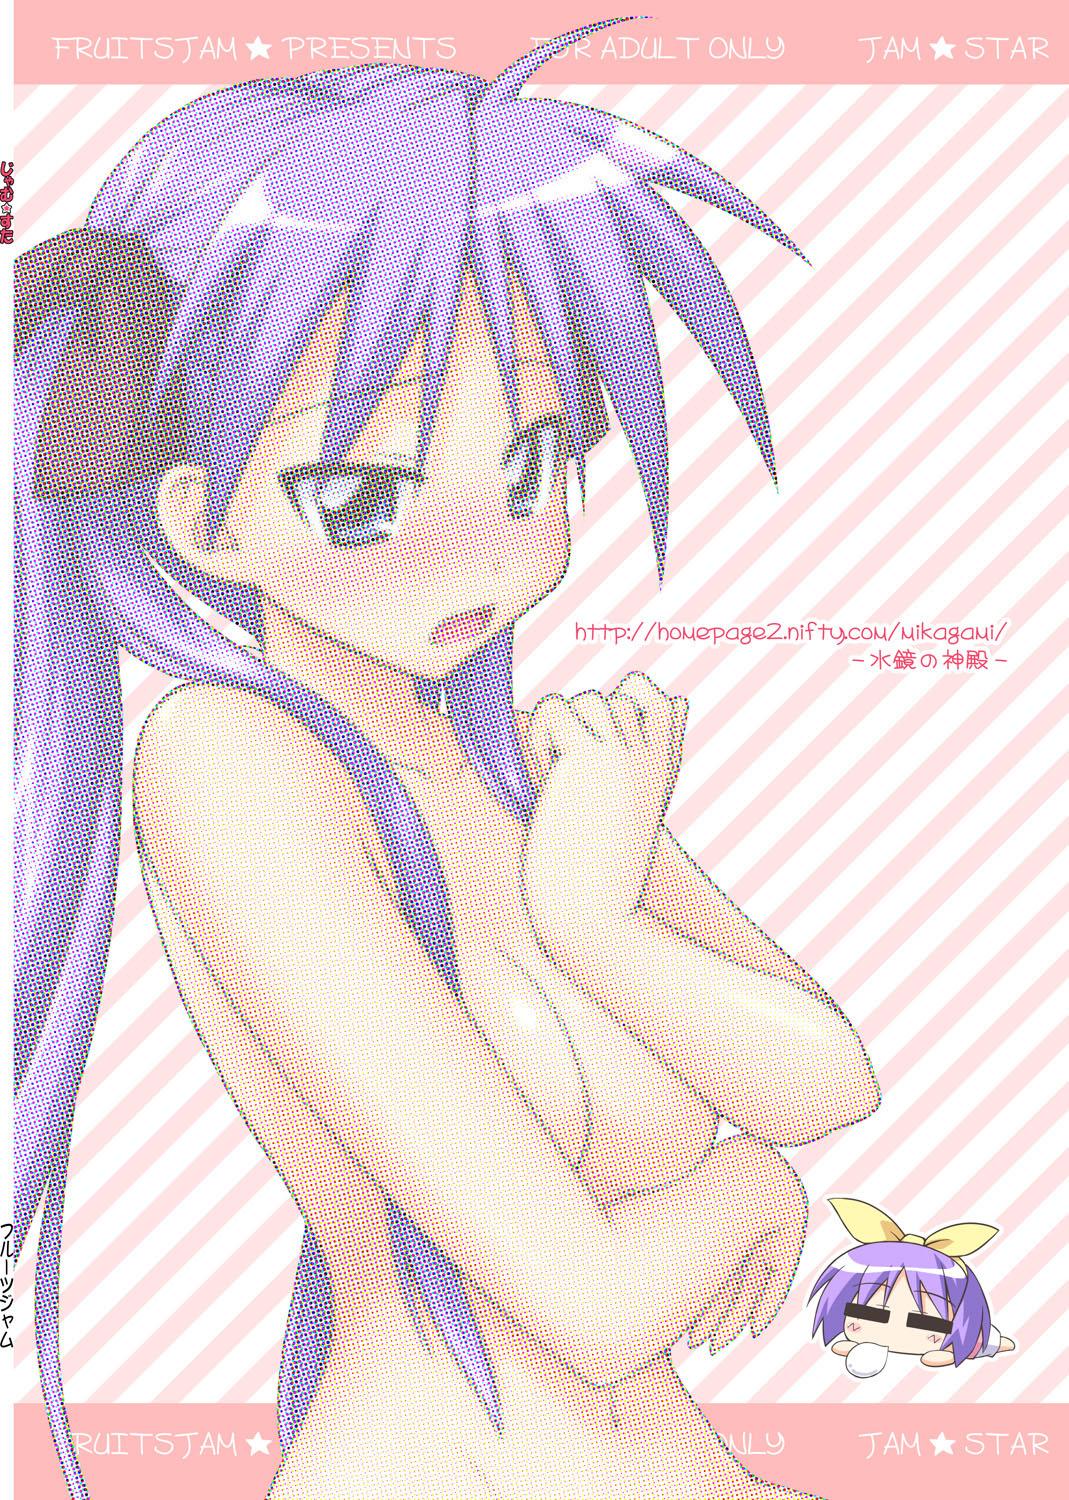 From Jam Star - Lucky star Mojada - Page 26